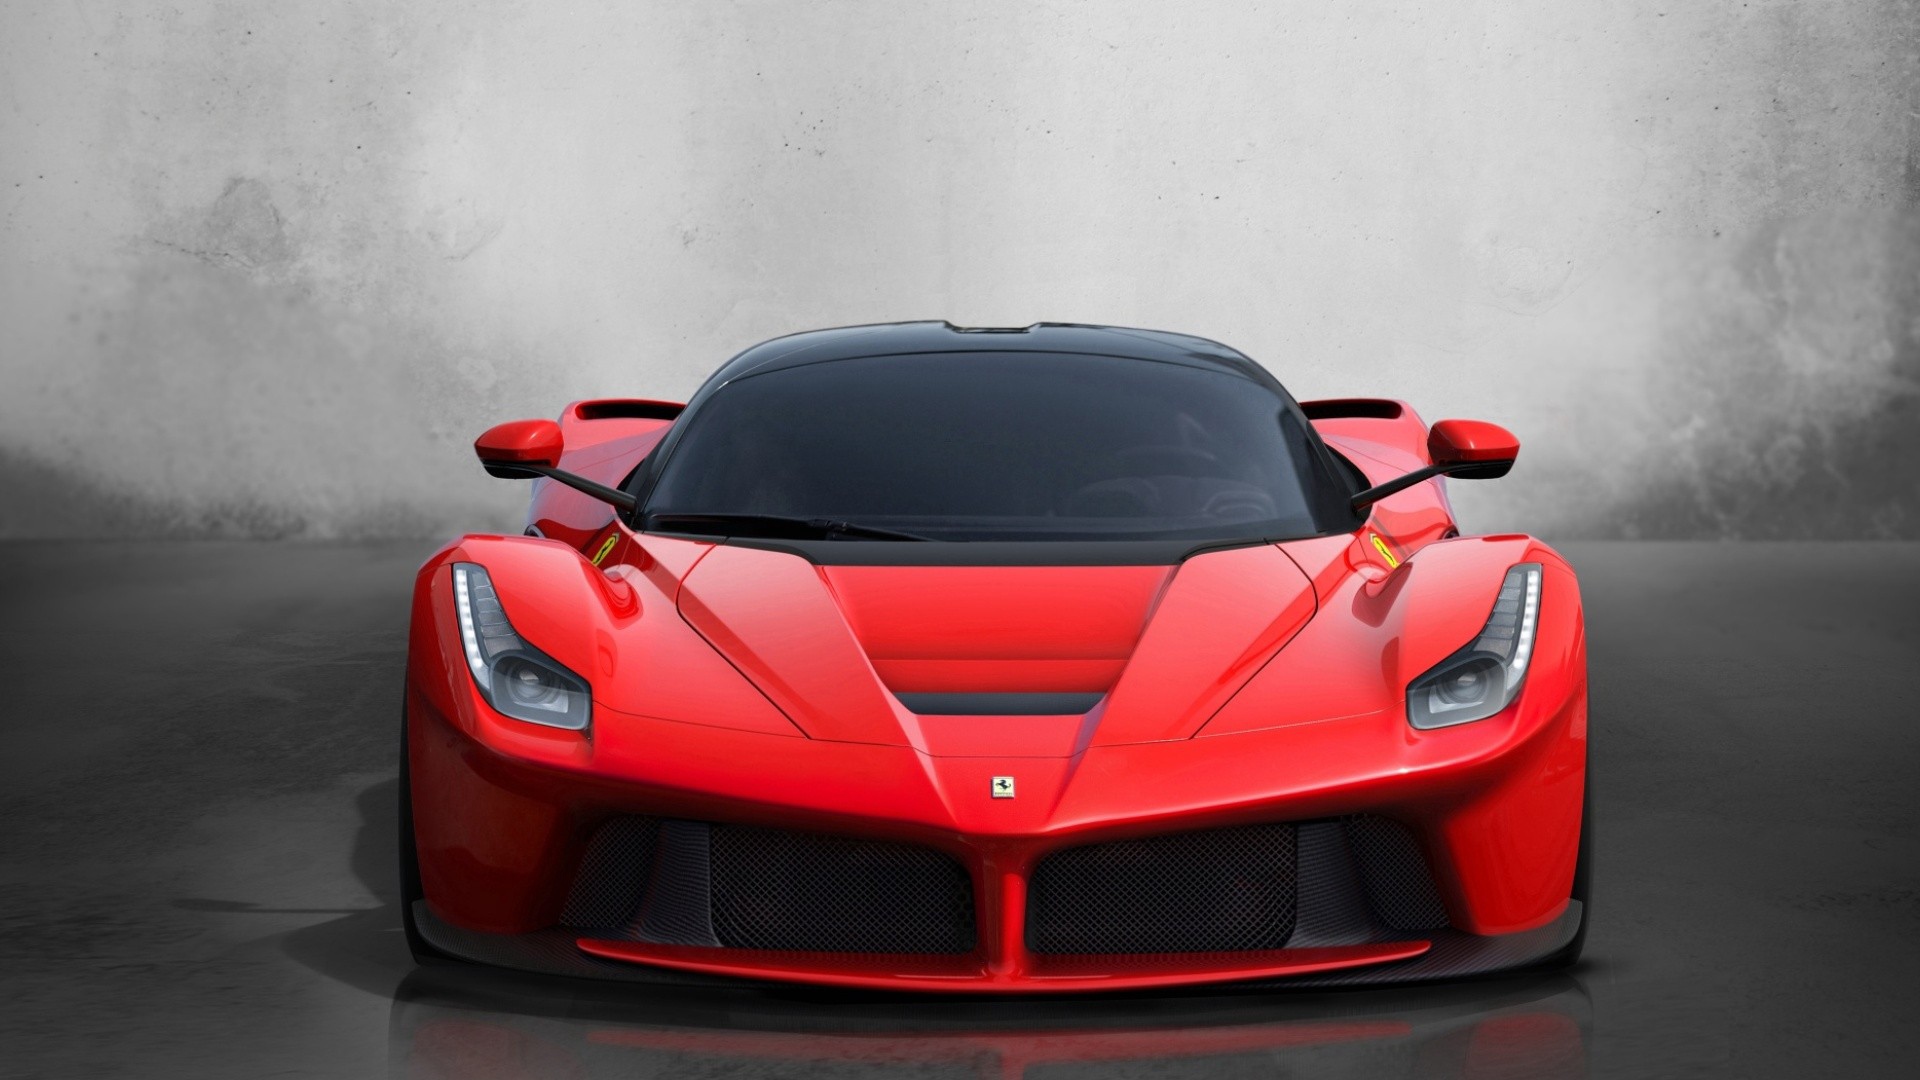 147158 download wallpaper auto, sports, ferrari, cars, red screensavers and pictures for free